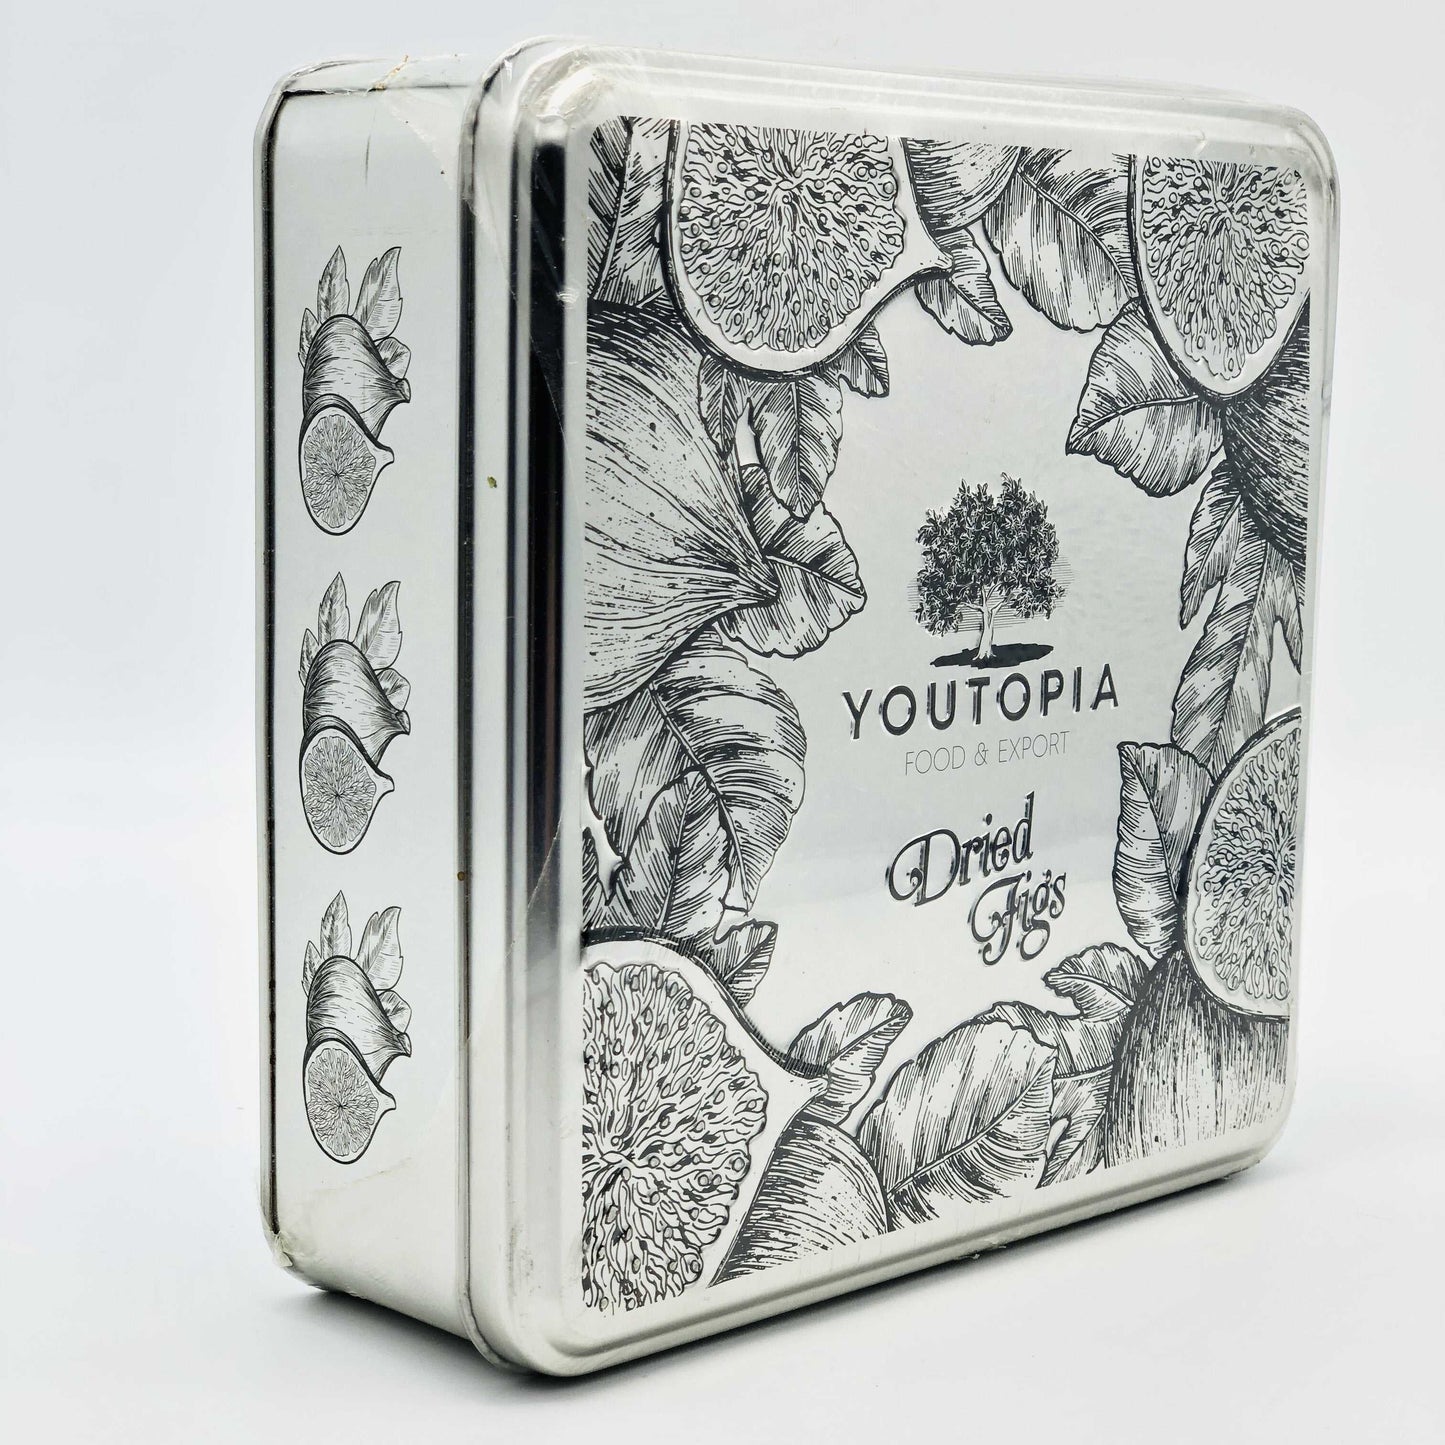 Youtopia, Export Quality Dried Figs in Metal Box, 720g